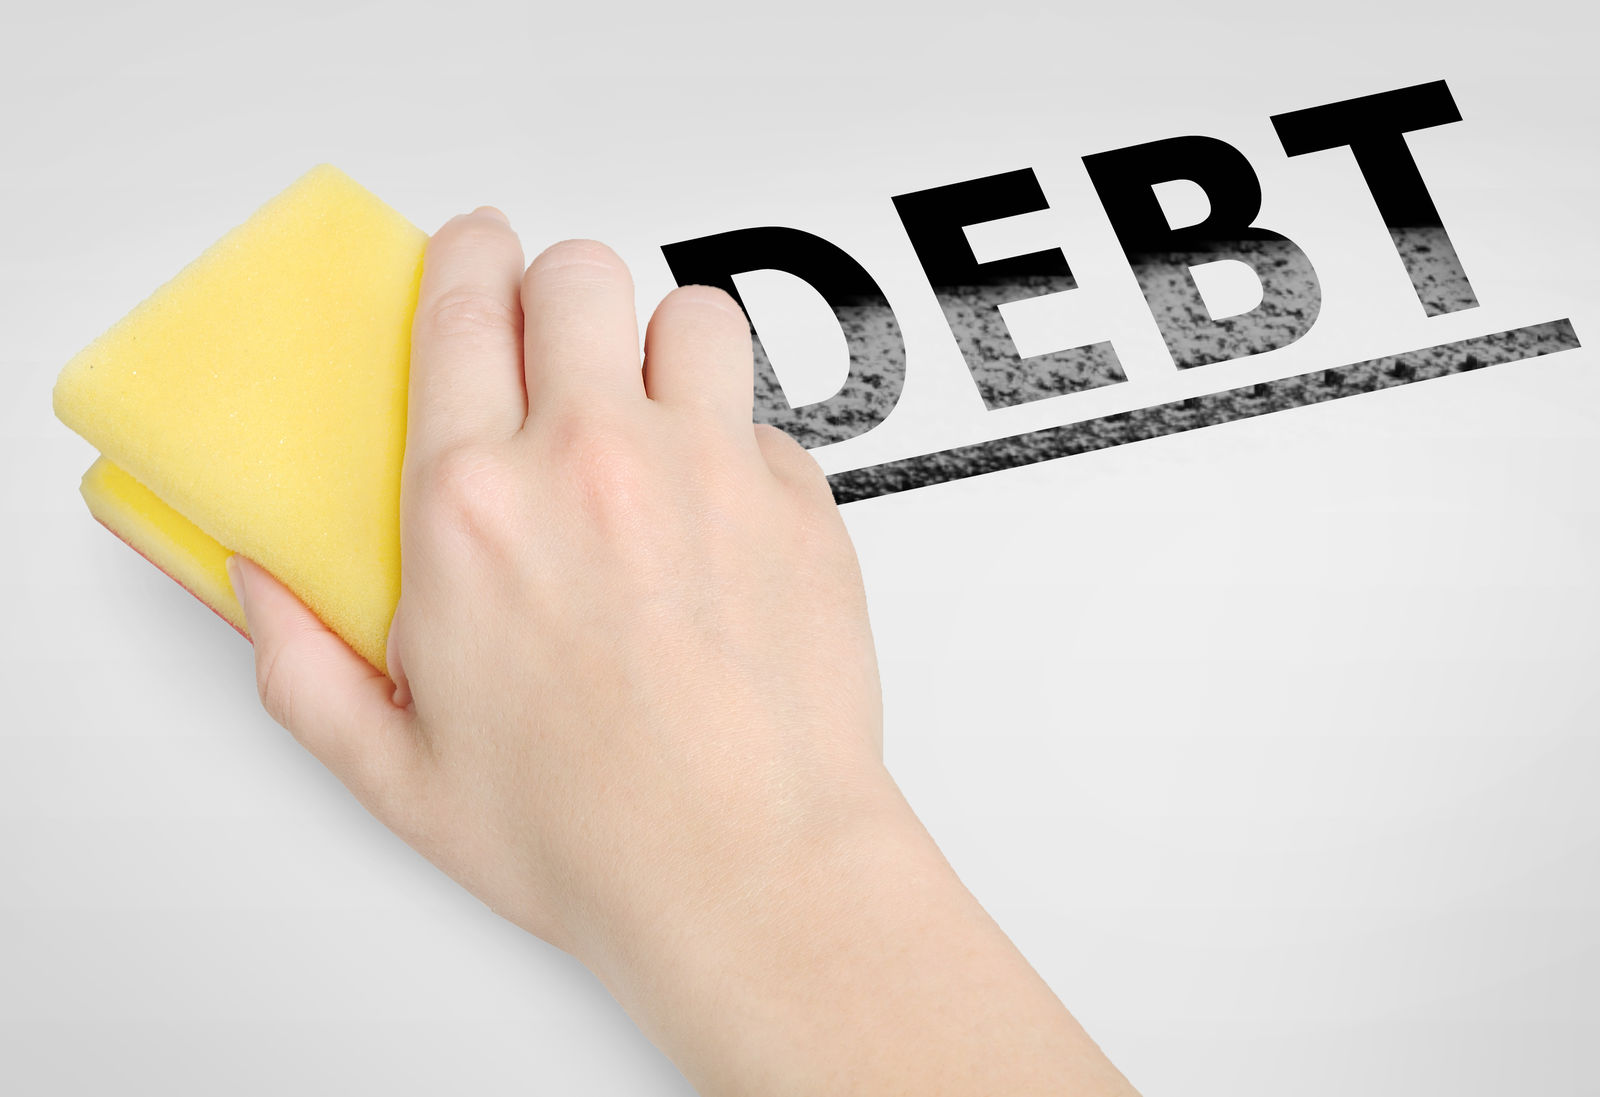 Can a life insurance policy be used to pay debt?